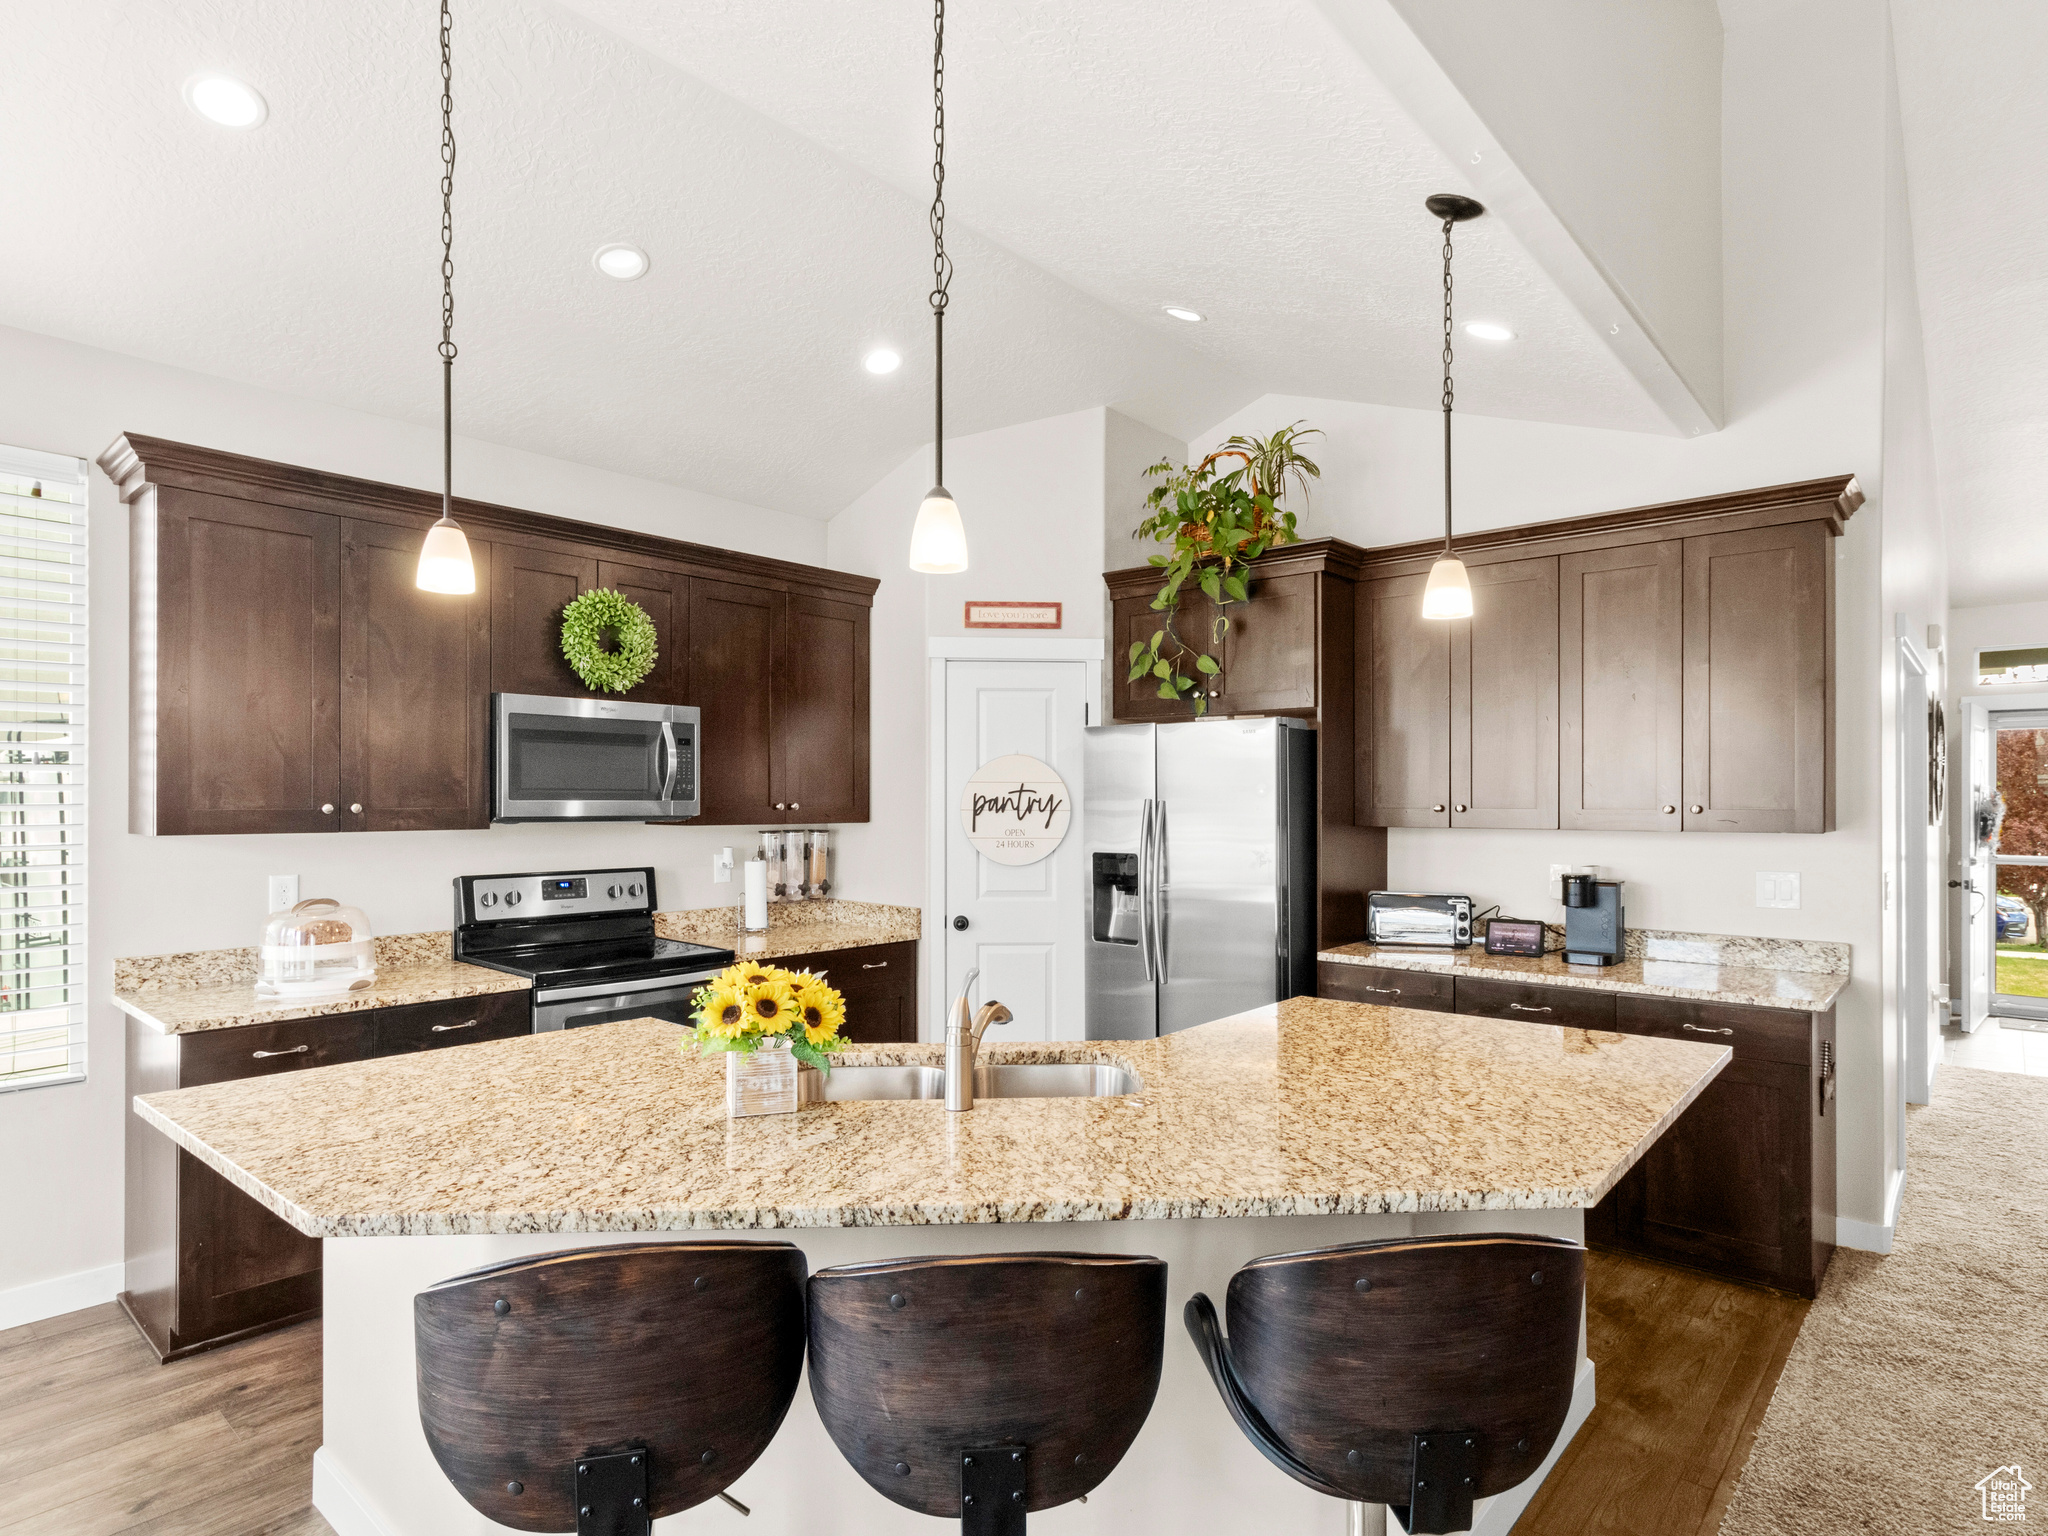 Kitchen featuring dark brown cabinets, decorative light fixtures, appliances with stainless steel finishes, wood-type flooring, and a kitchen island with sink